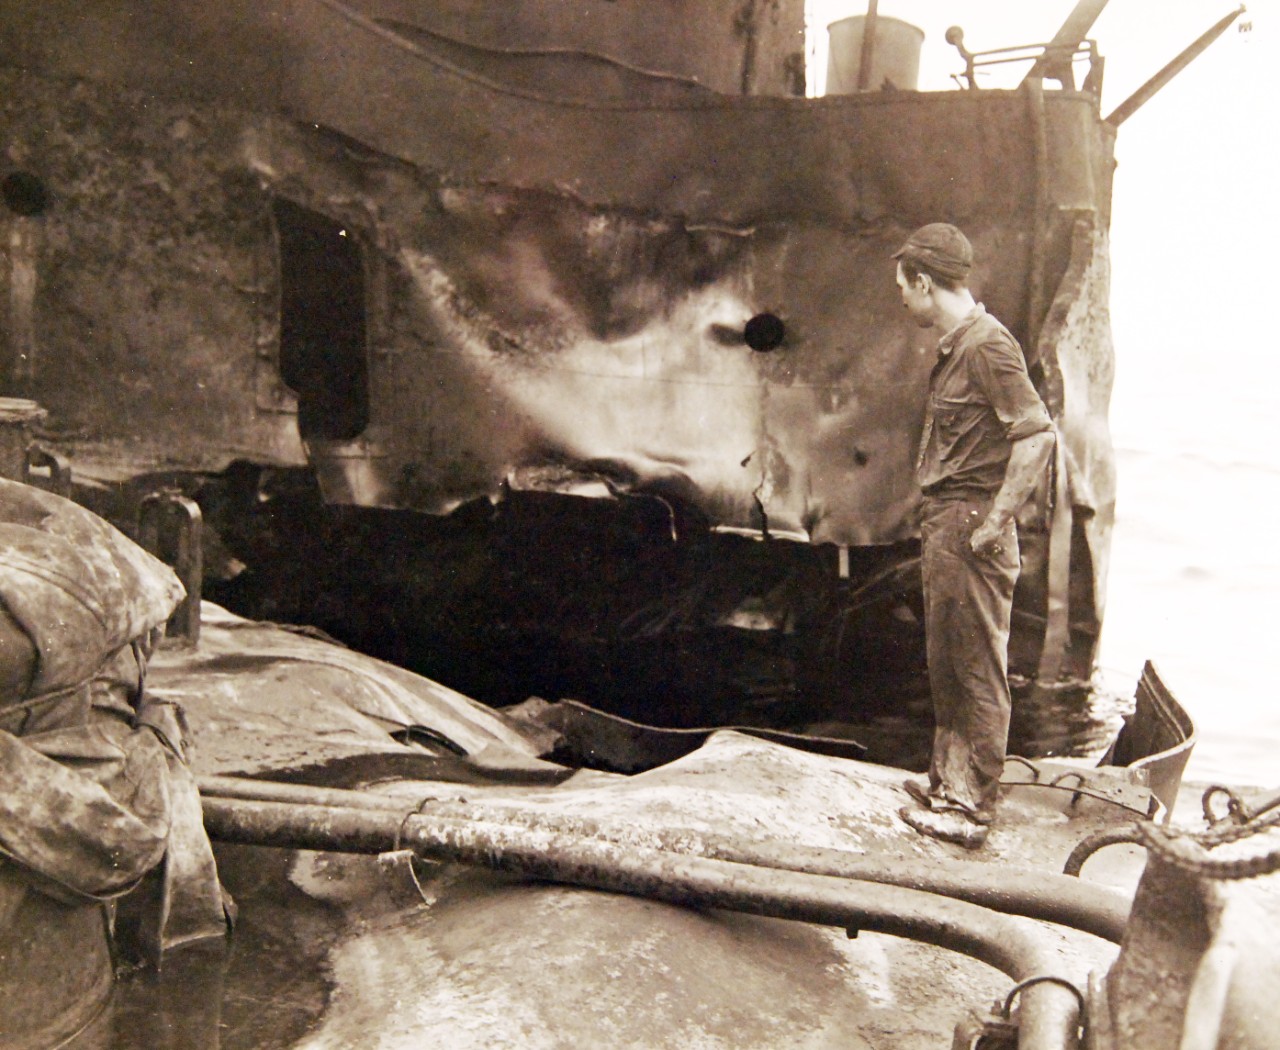 <p>80-G-61582: German U-boat attacks, WWII. SS Pennsylvania Sun burning after being torpedoed amidships by a torpedo by U-571 on July 15, 1942. Shown: Oil fire smothered showing damage to deck and bulkheads.&nbsp;</p>
